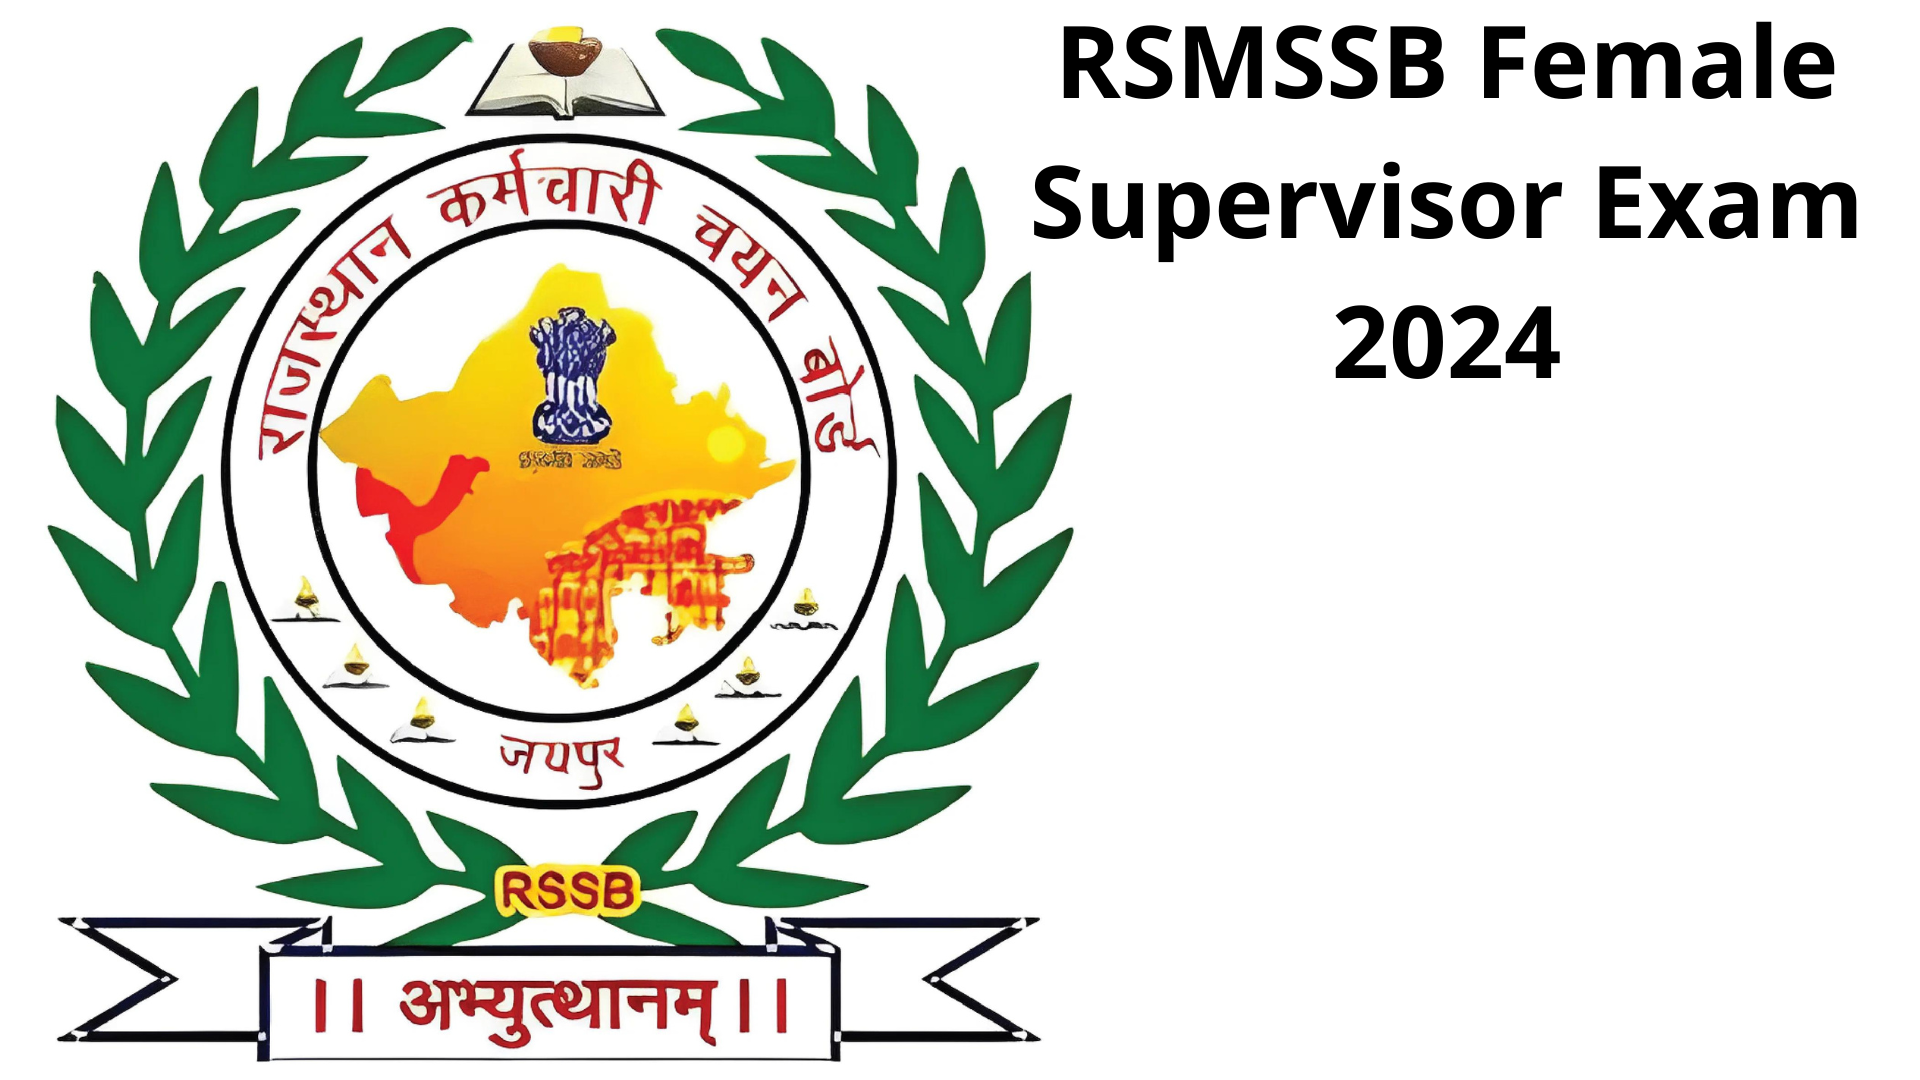 Rajasthan RSMSSB Female Supervisor Exam Date, Admit Card, Syllabus, Study Tips, and More